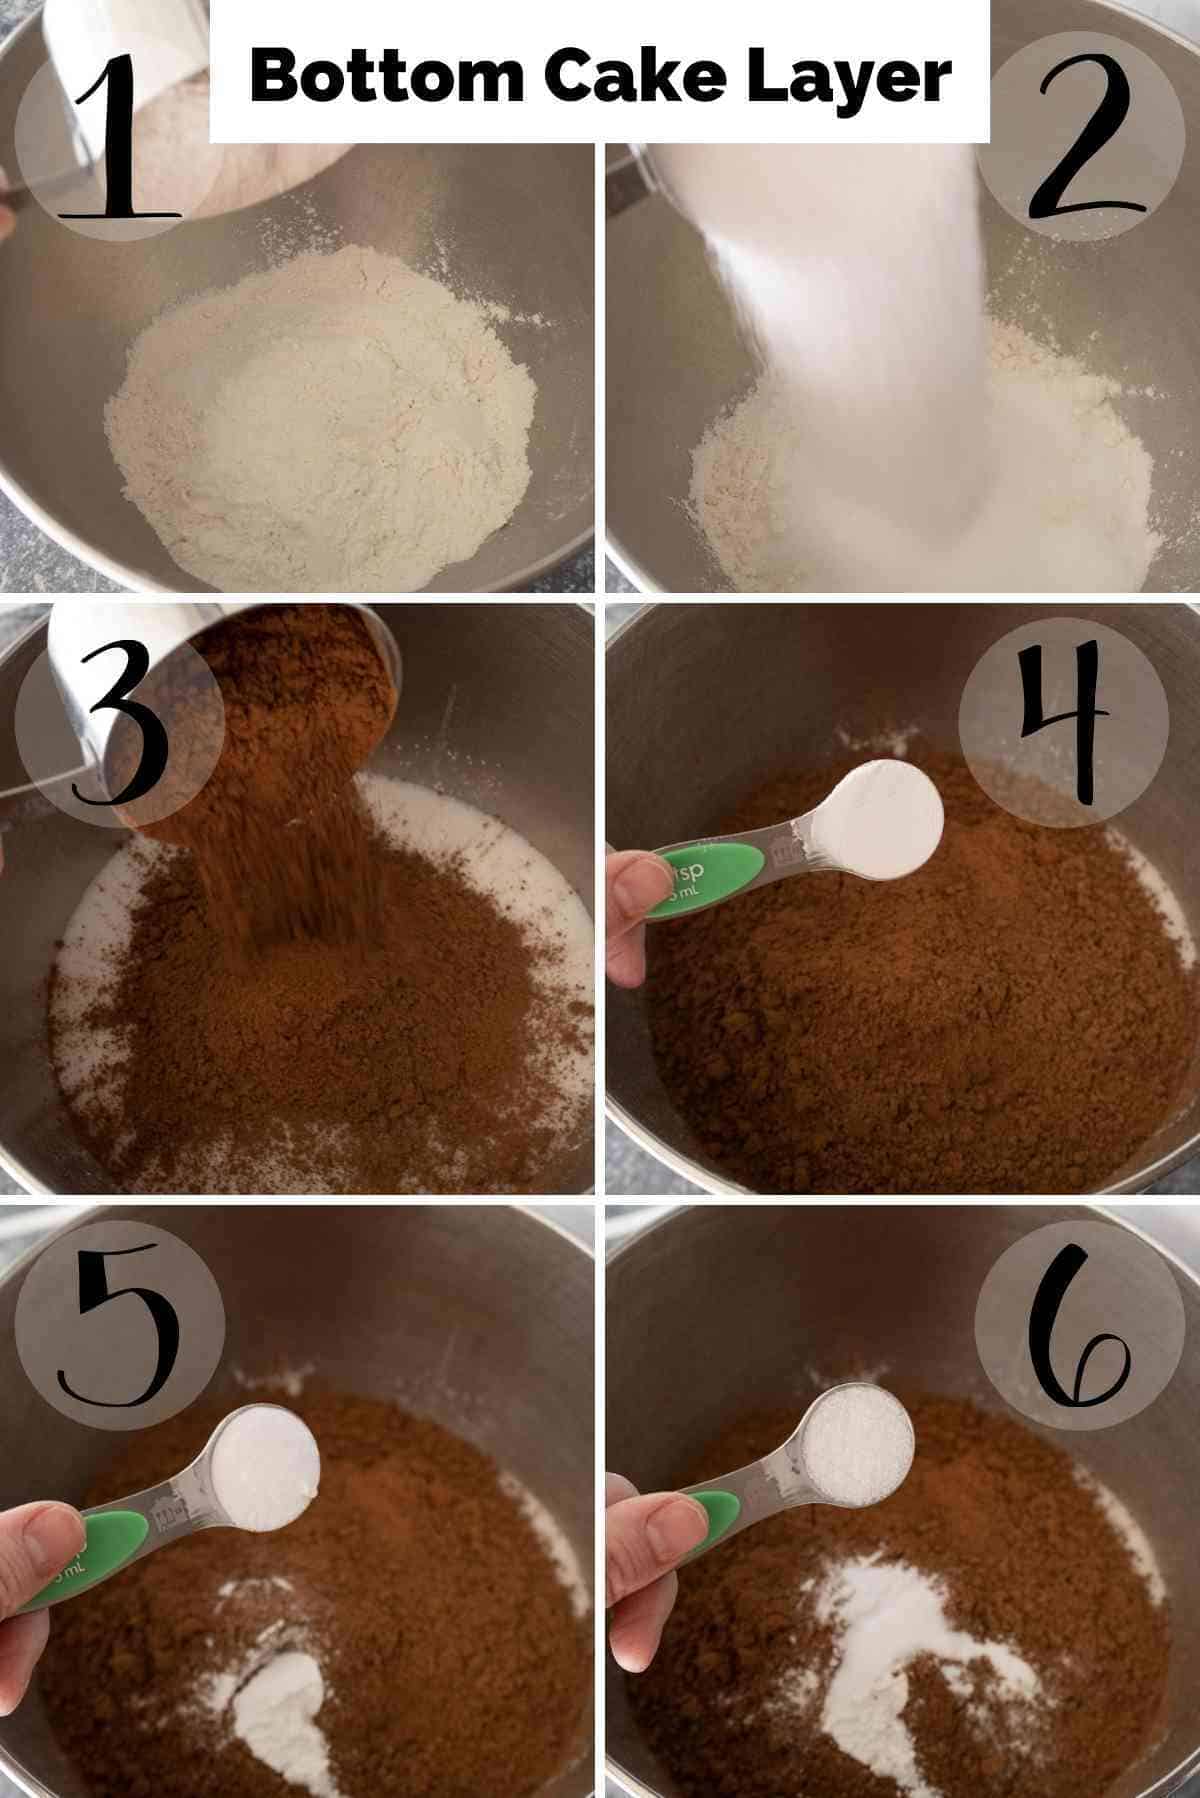 Dry ingredients for the cake layer in a mixing bowl.